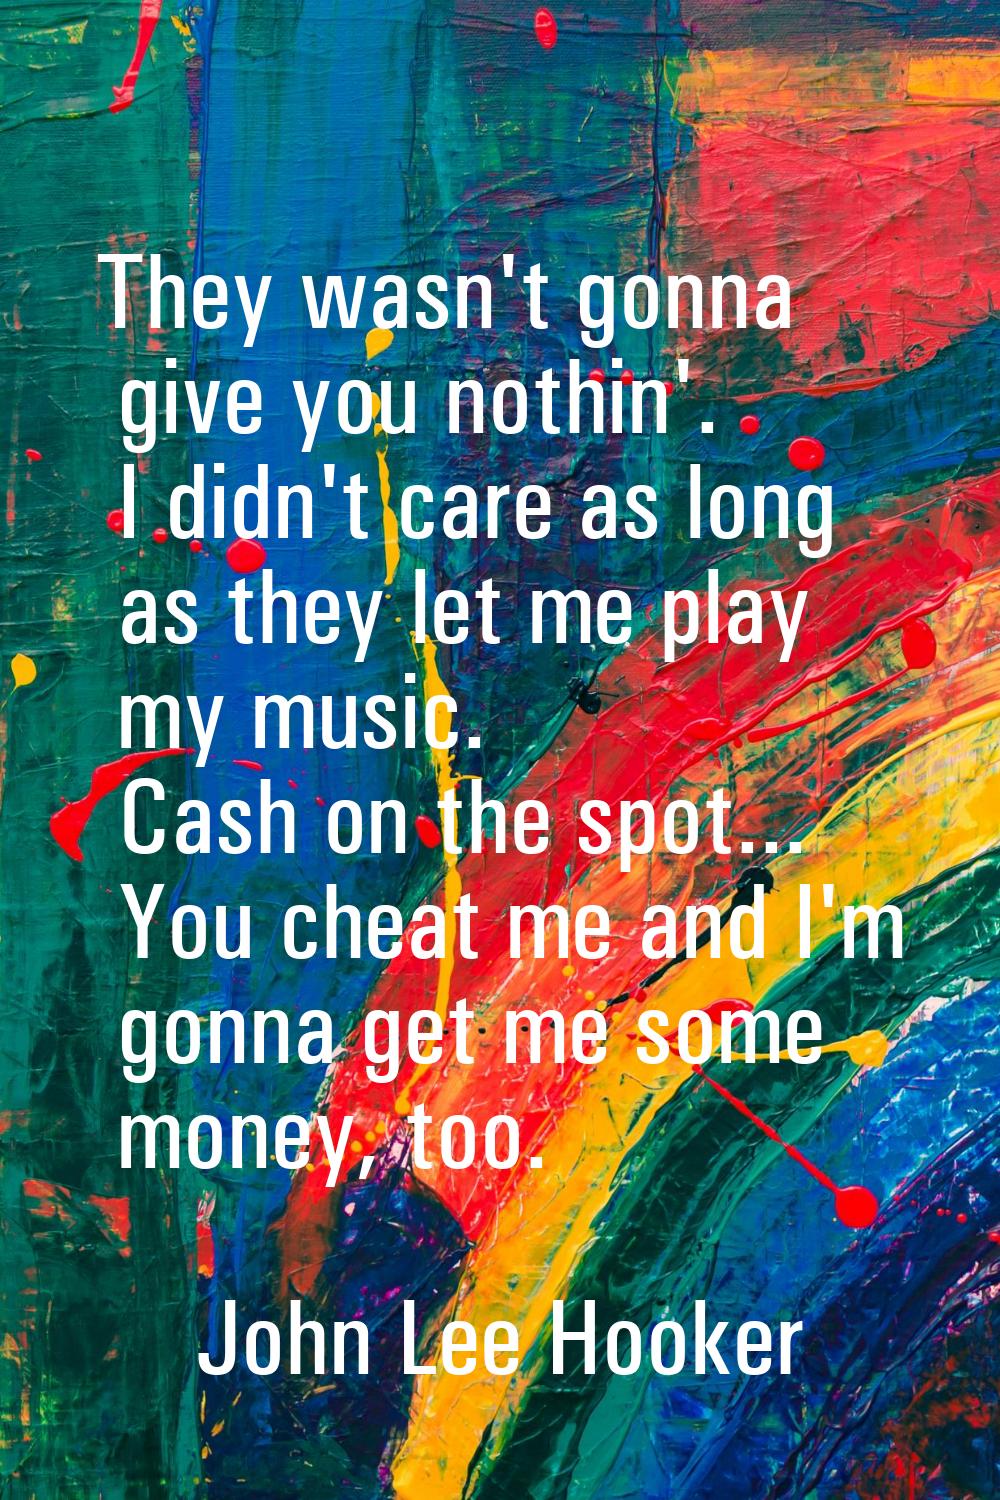 They wasn't gonna give you nothin'. I didn't care as long as they let me play my music. Cash on the